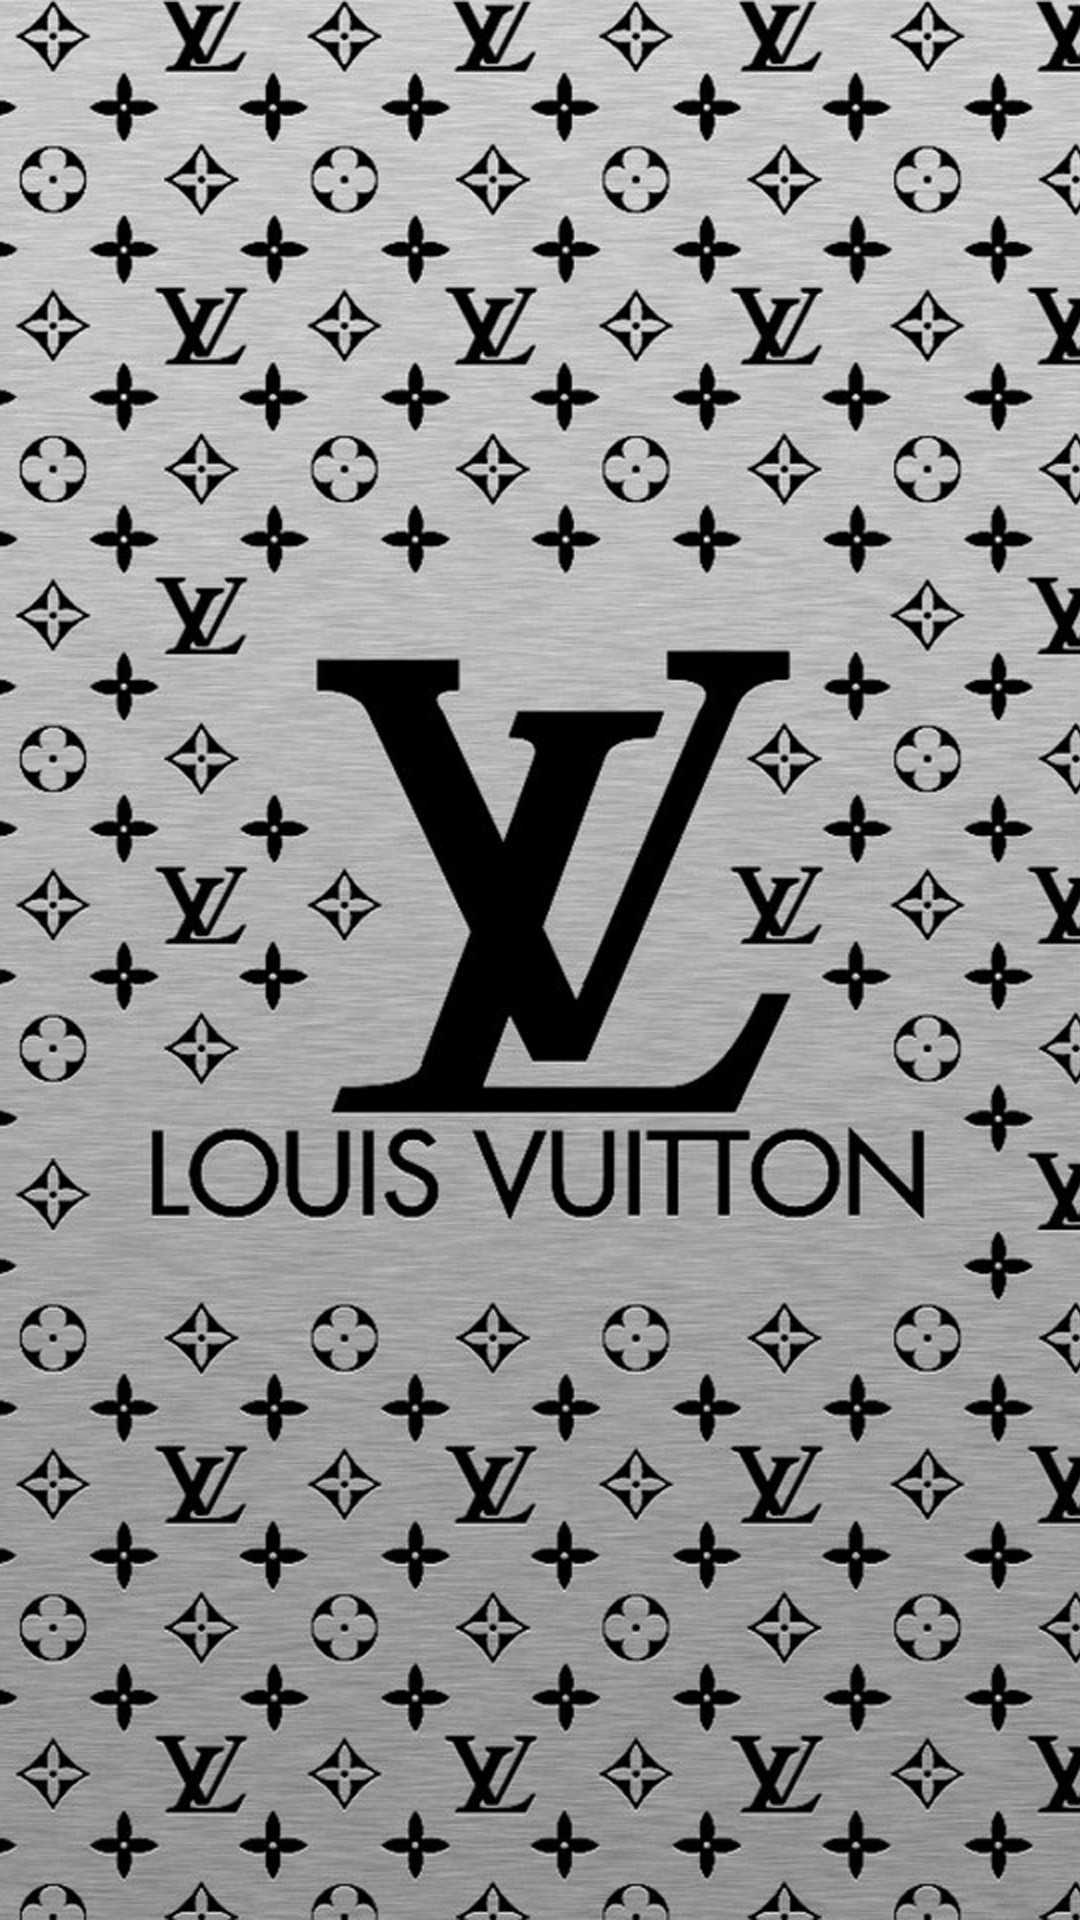 Louis vuitton Wallpapers for Galaxy S5